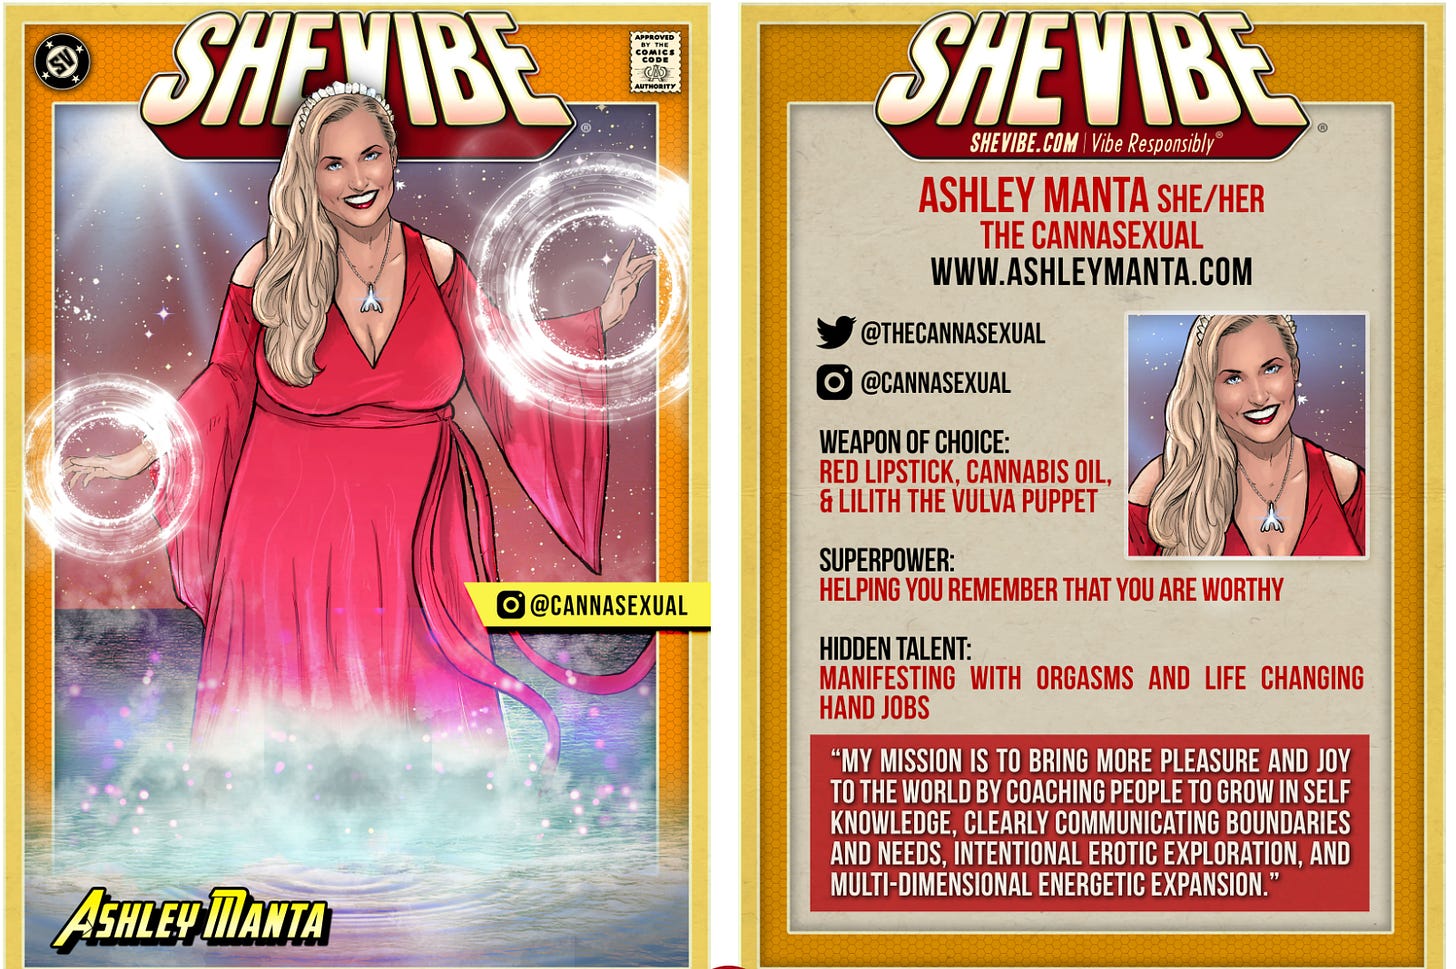 Shevibe trading card. Superhero illustration of Ashley ethereally floating above water. She is smiling at the viewer, wearing a flowing red dress that is tied at the waist. She is wearing a silver clitoris necklace. Her hands are lifted from her sides and manifesting light.